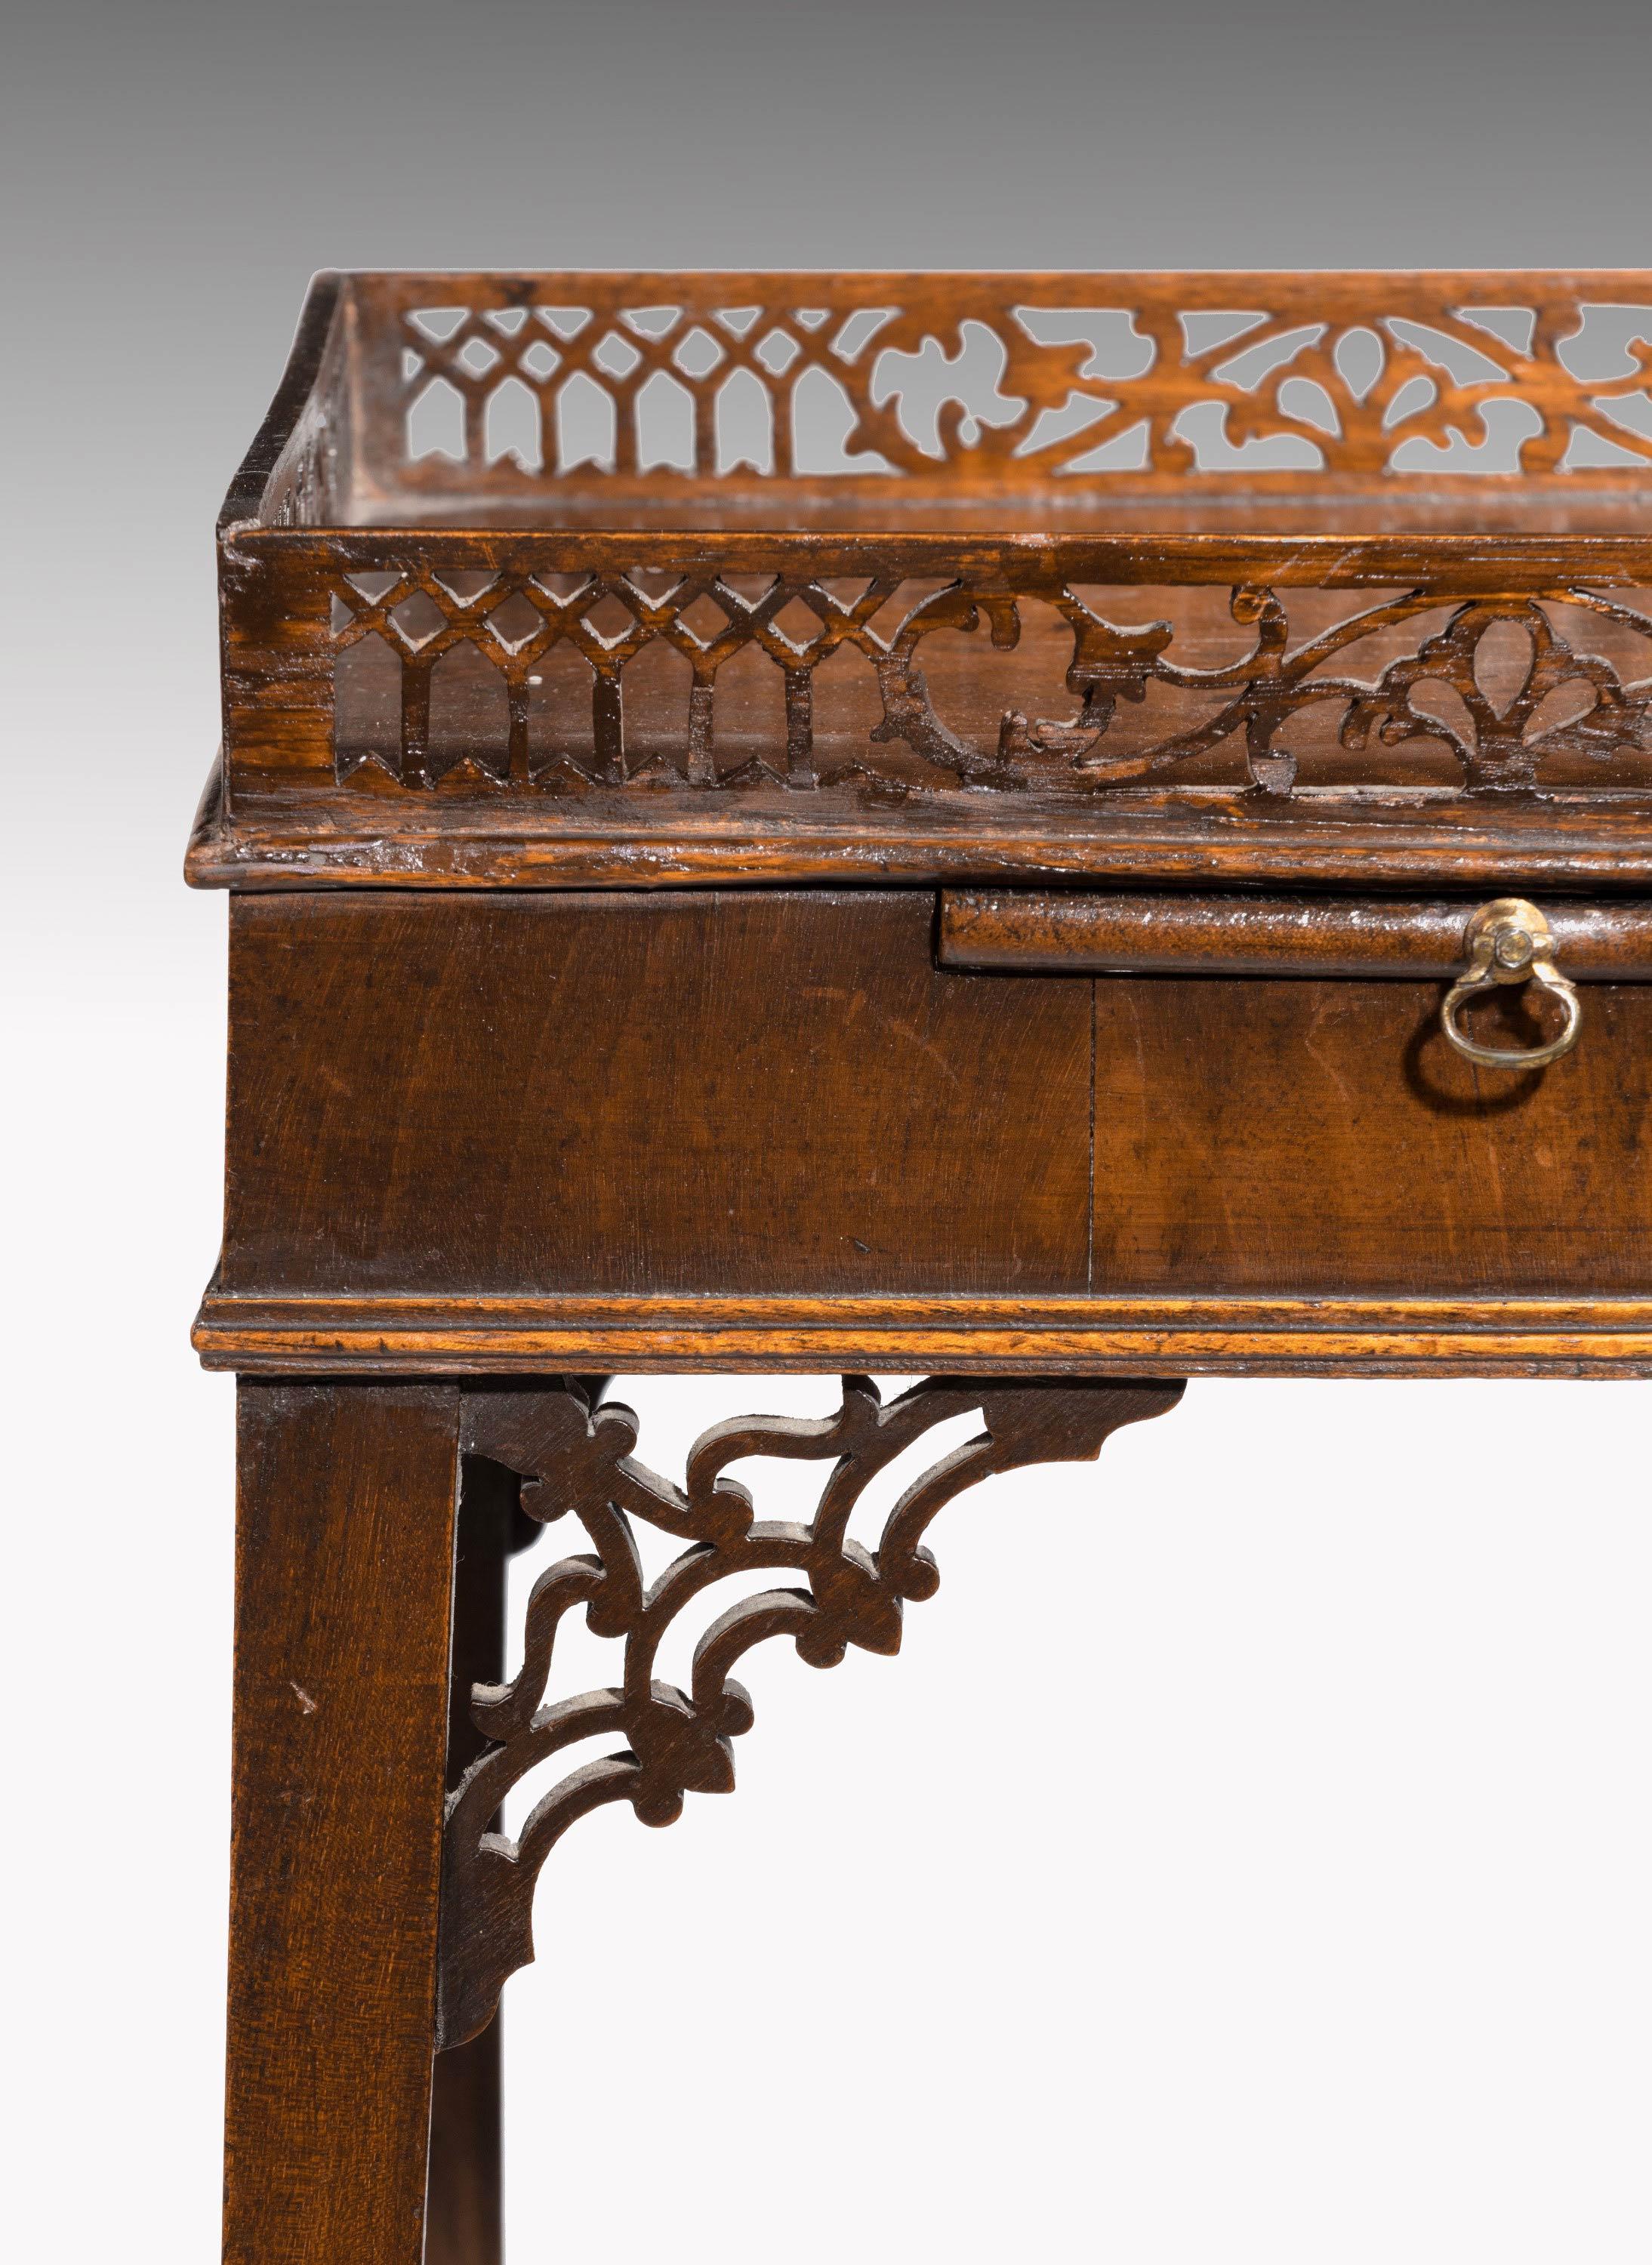 A George III period mahogany kettle stand in the Chippendale manner. With a well executed fretwork top and corner blocks incorporating a small slide. With original axe head knob.
   